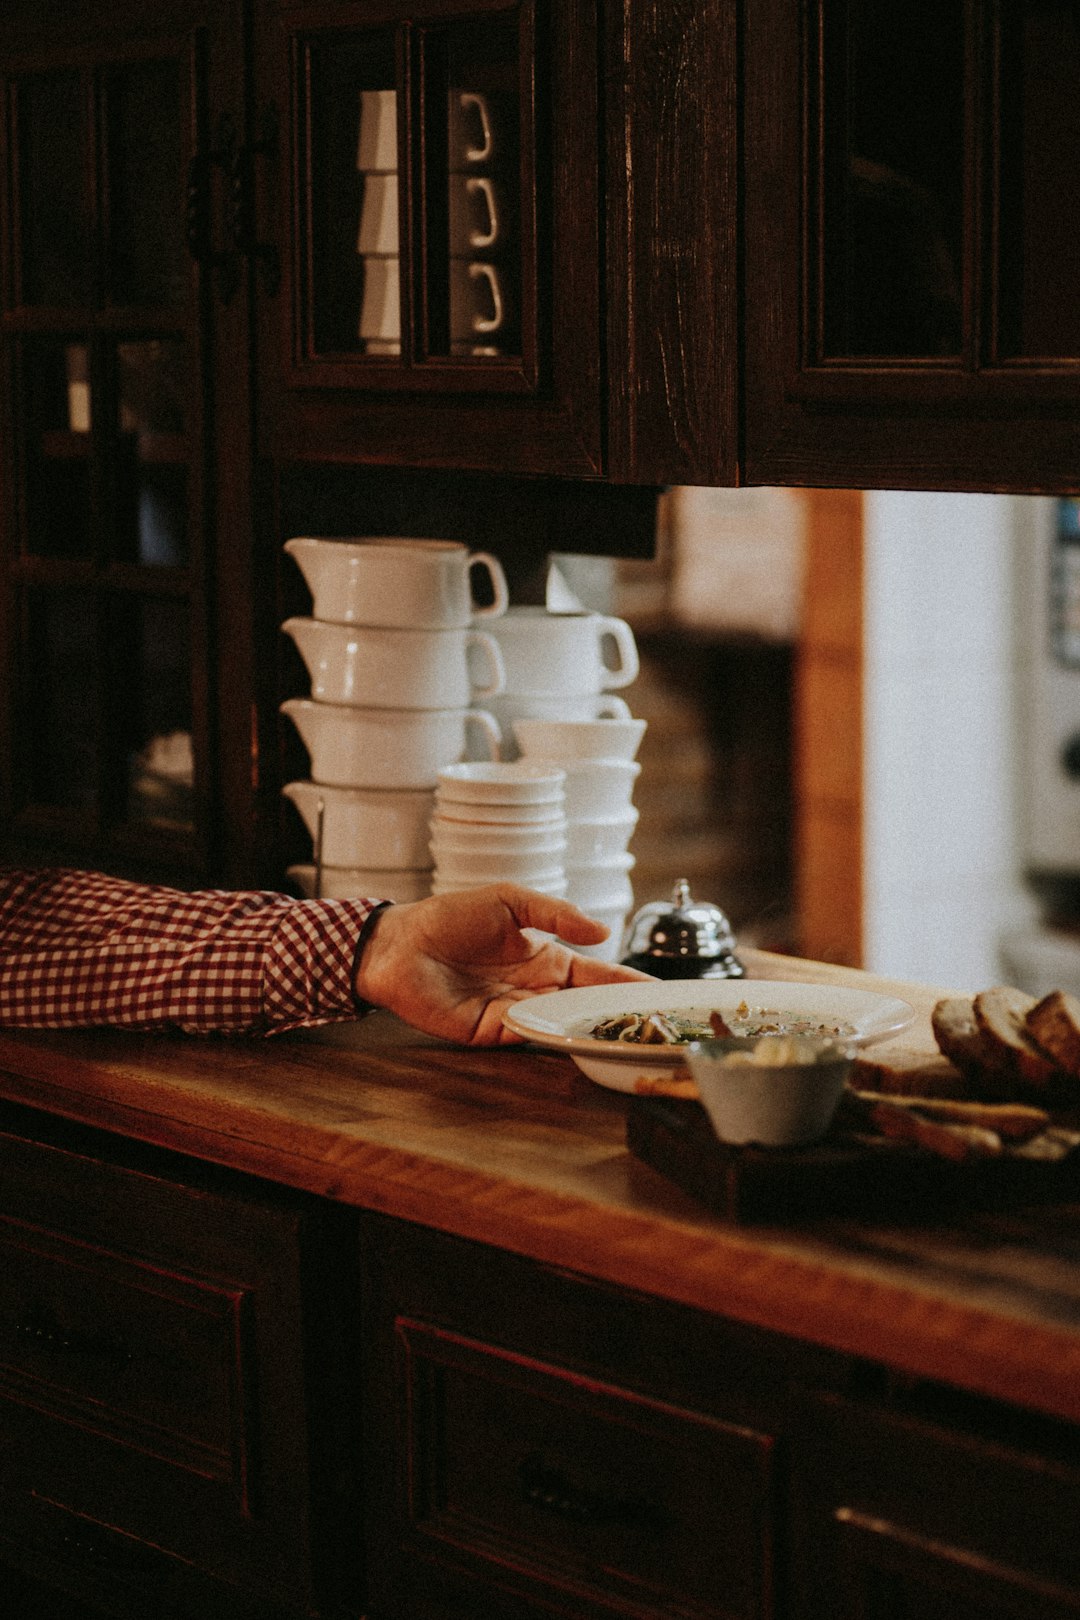 person in black and white checkered long sleeve shirt holding white ceramic teacup on brown wooden